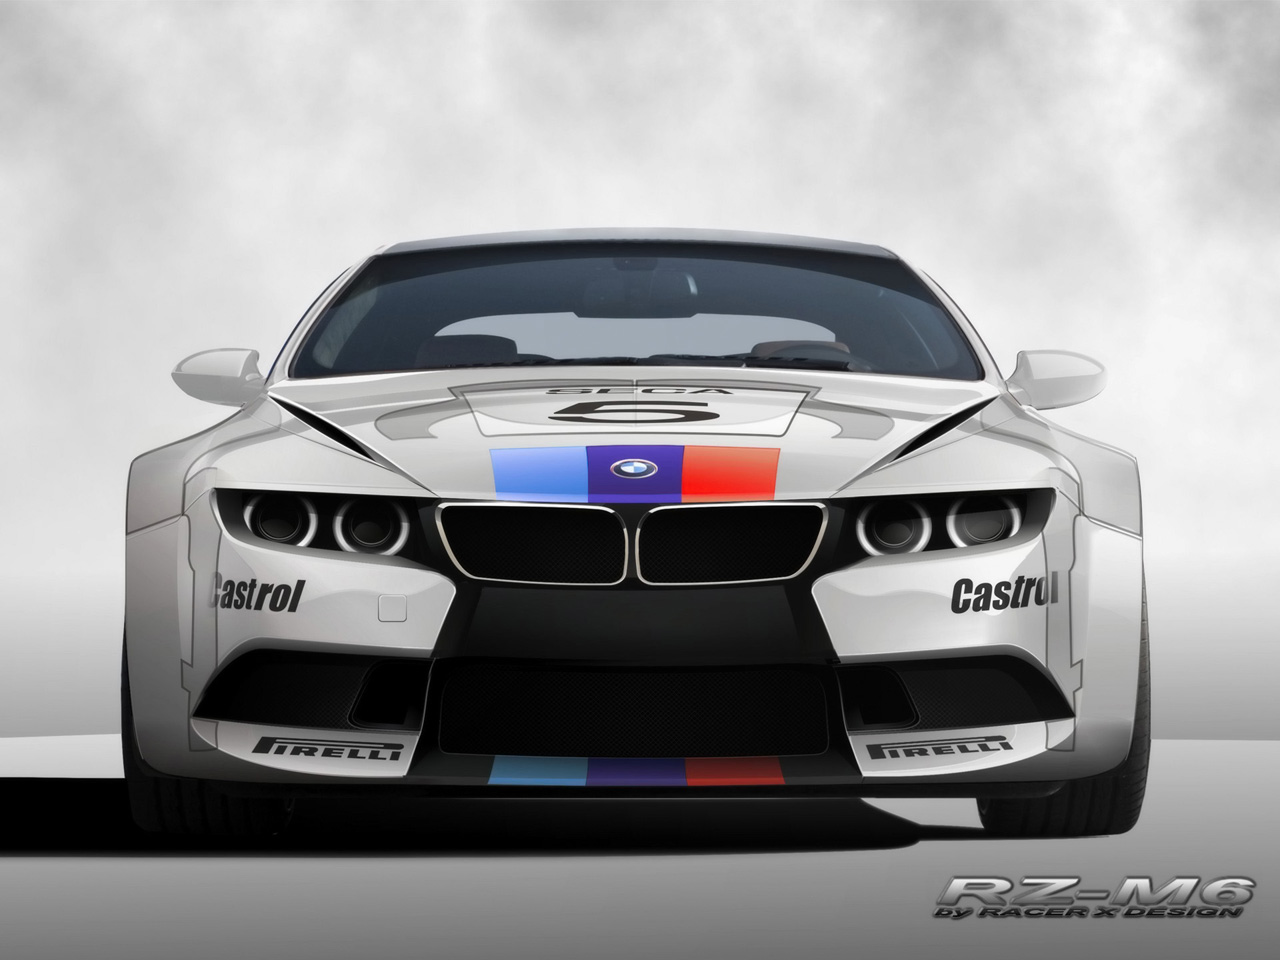 Free Download Bmw Car Wallpapers Hd Nice Wallpapers 1280x960 For Your Desktop Mobile Tablet Explore 50 Auto Wallpaper Grand Theft Auto Wallpaper Car Background Wallpaper Auto Wallpapers Hd